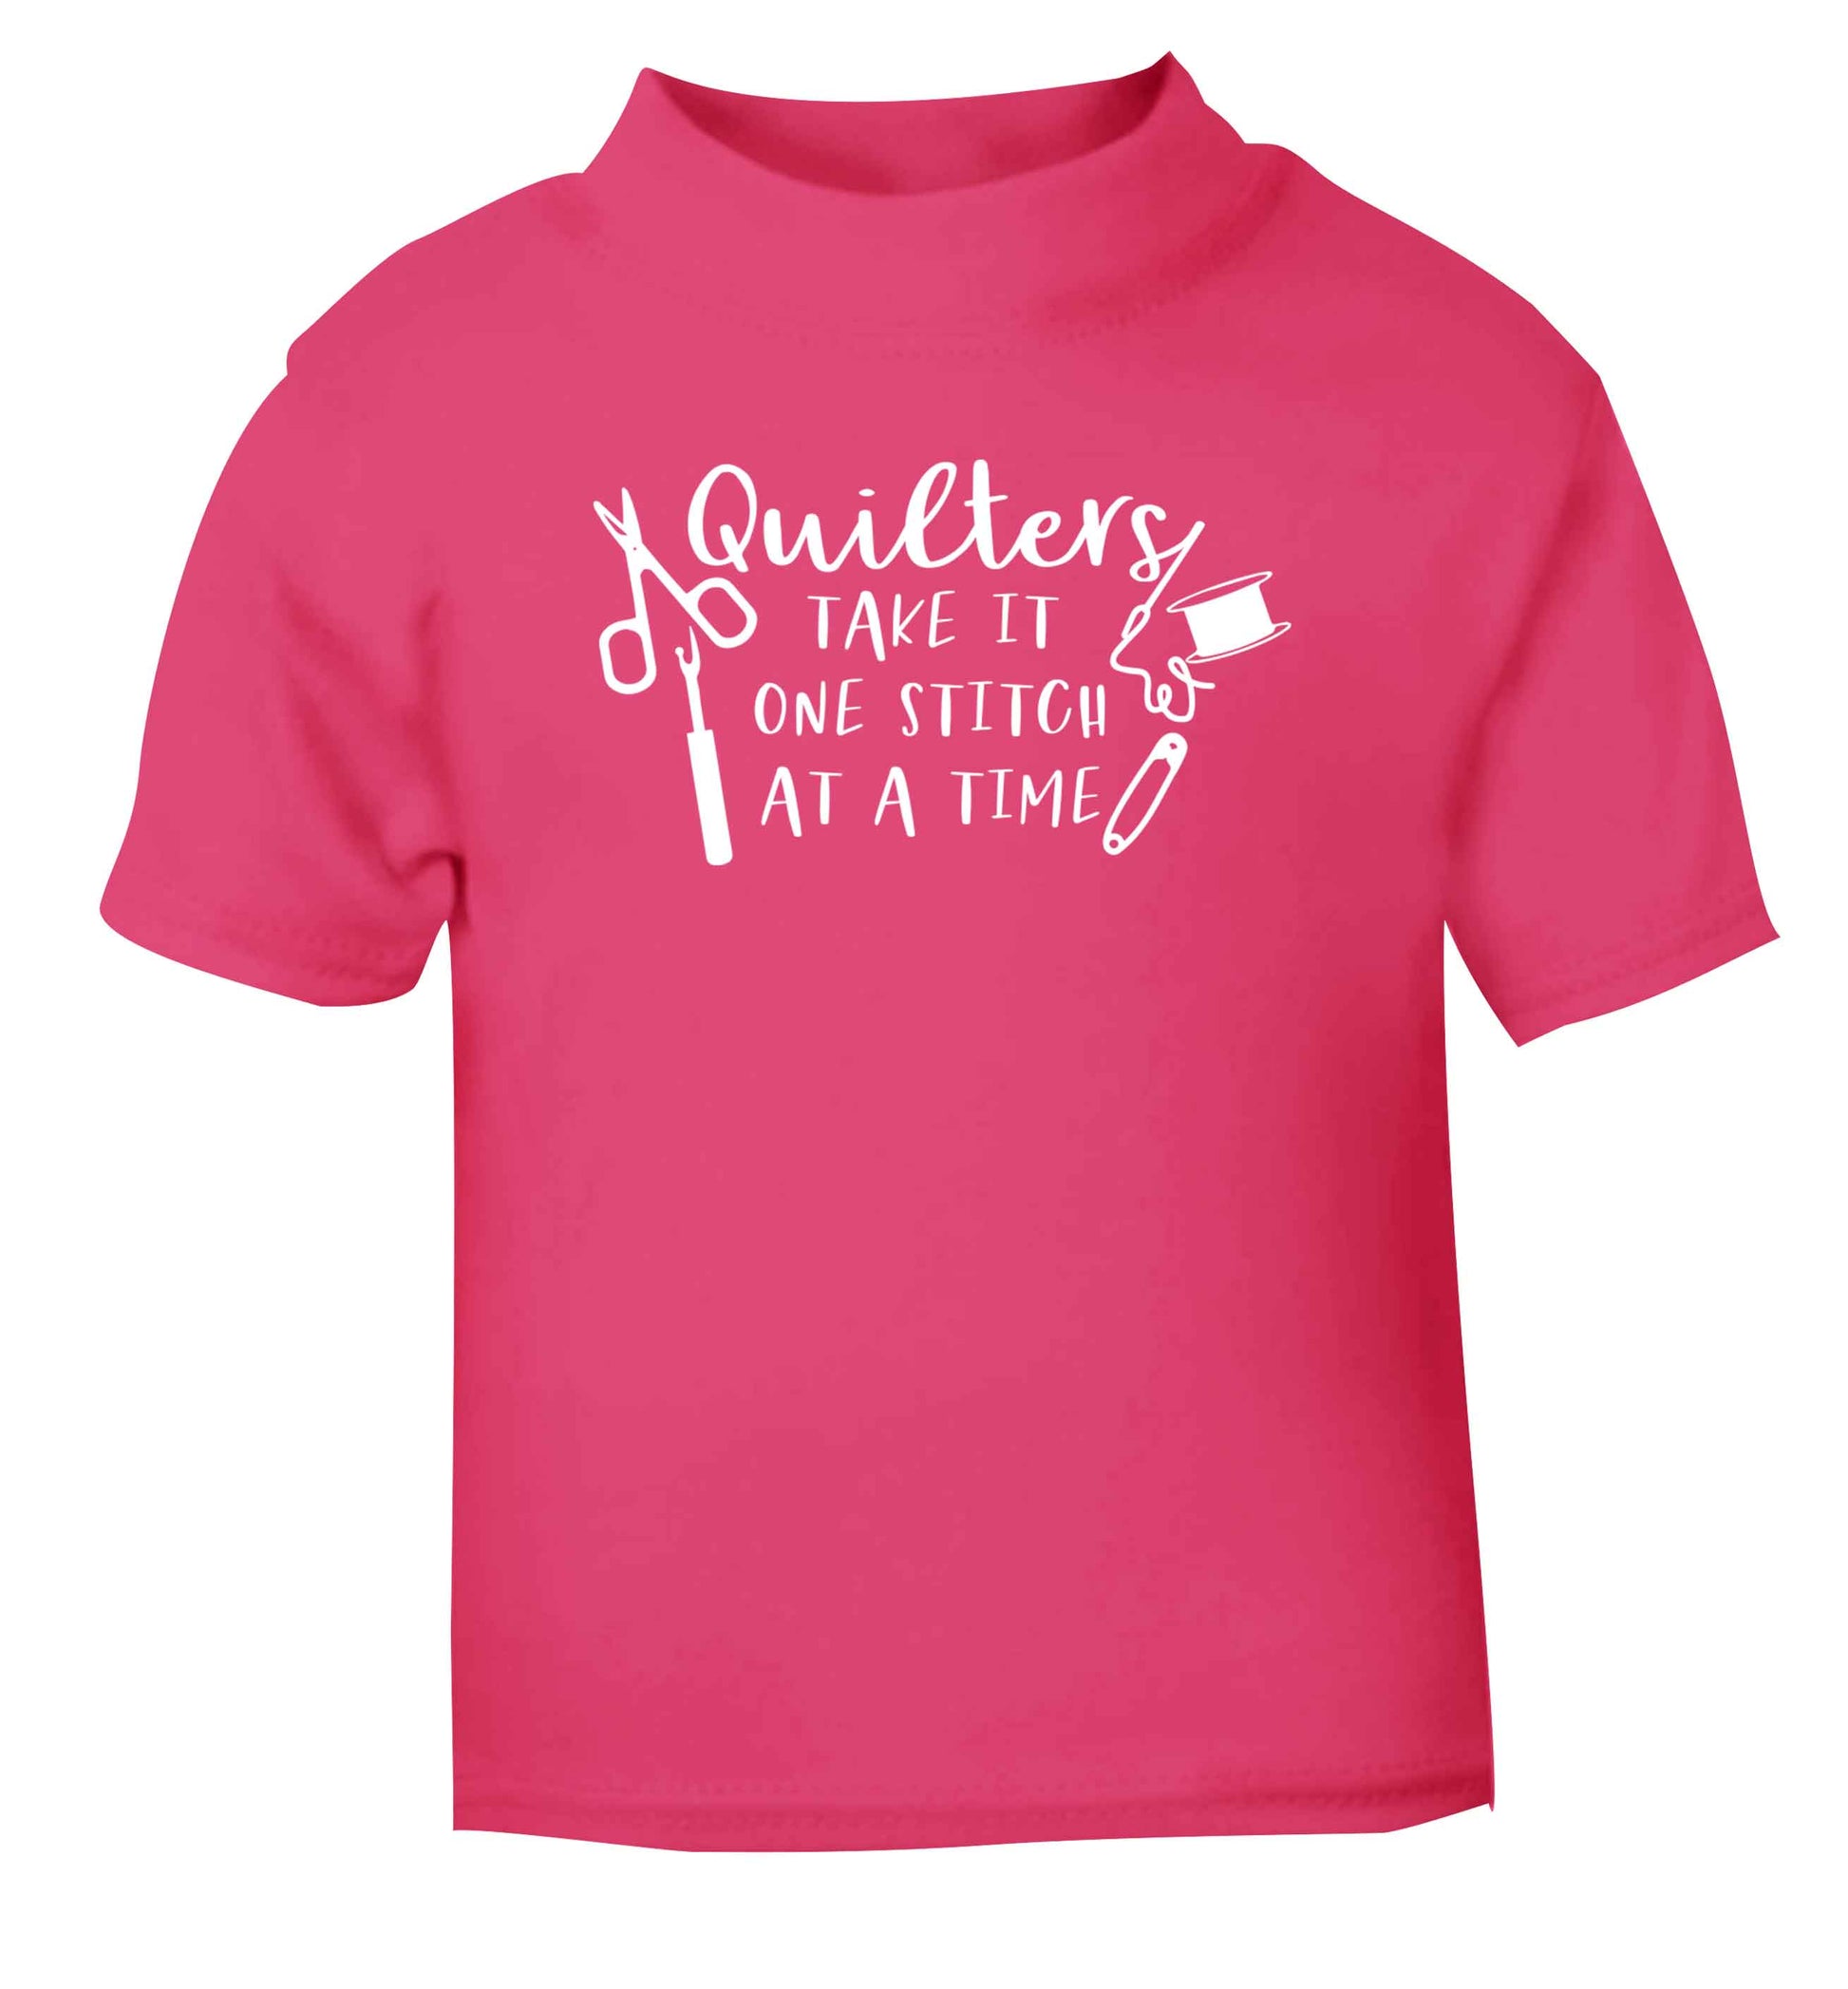 Quilters take it one stitch at a time  pink Baby Toddler Tshirt 2 Years